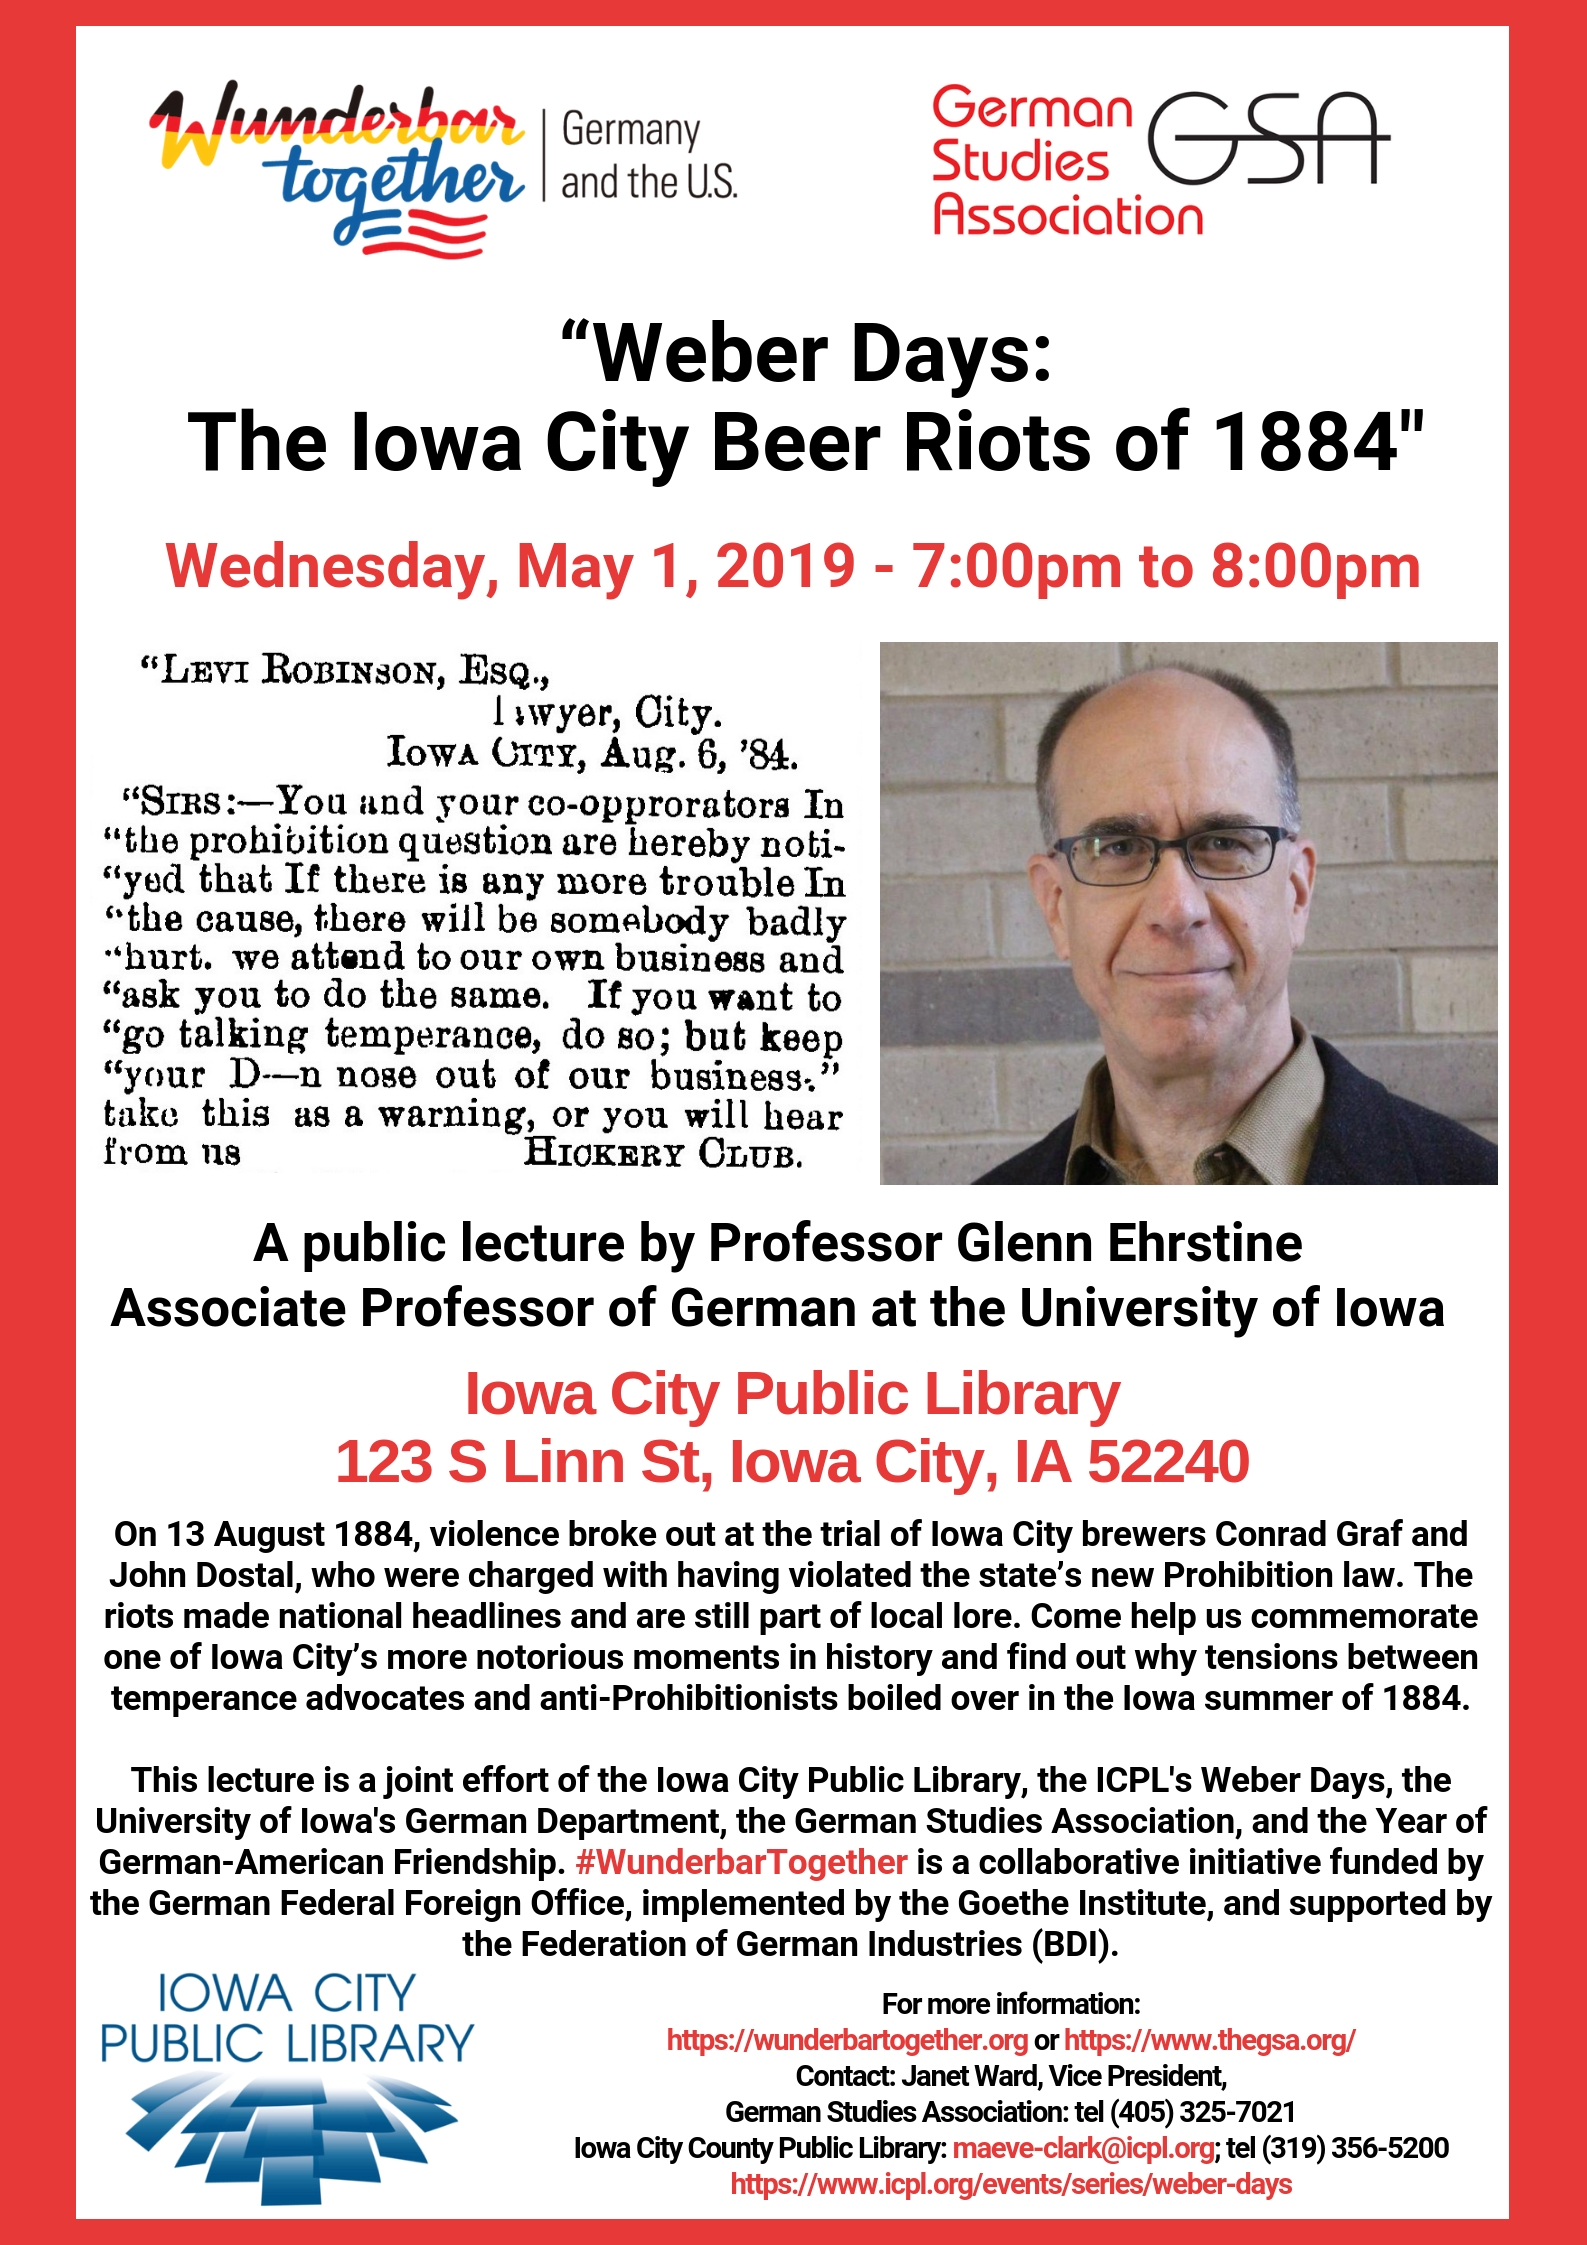 Event flyer: The Iowa City Beer Riots of 1884